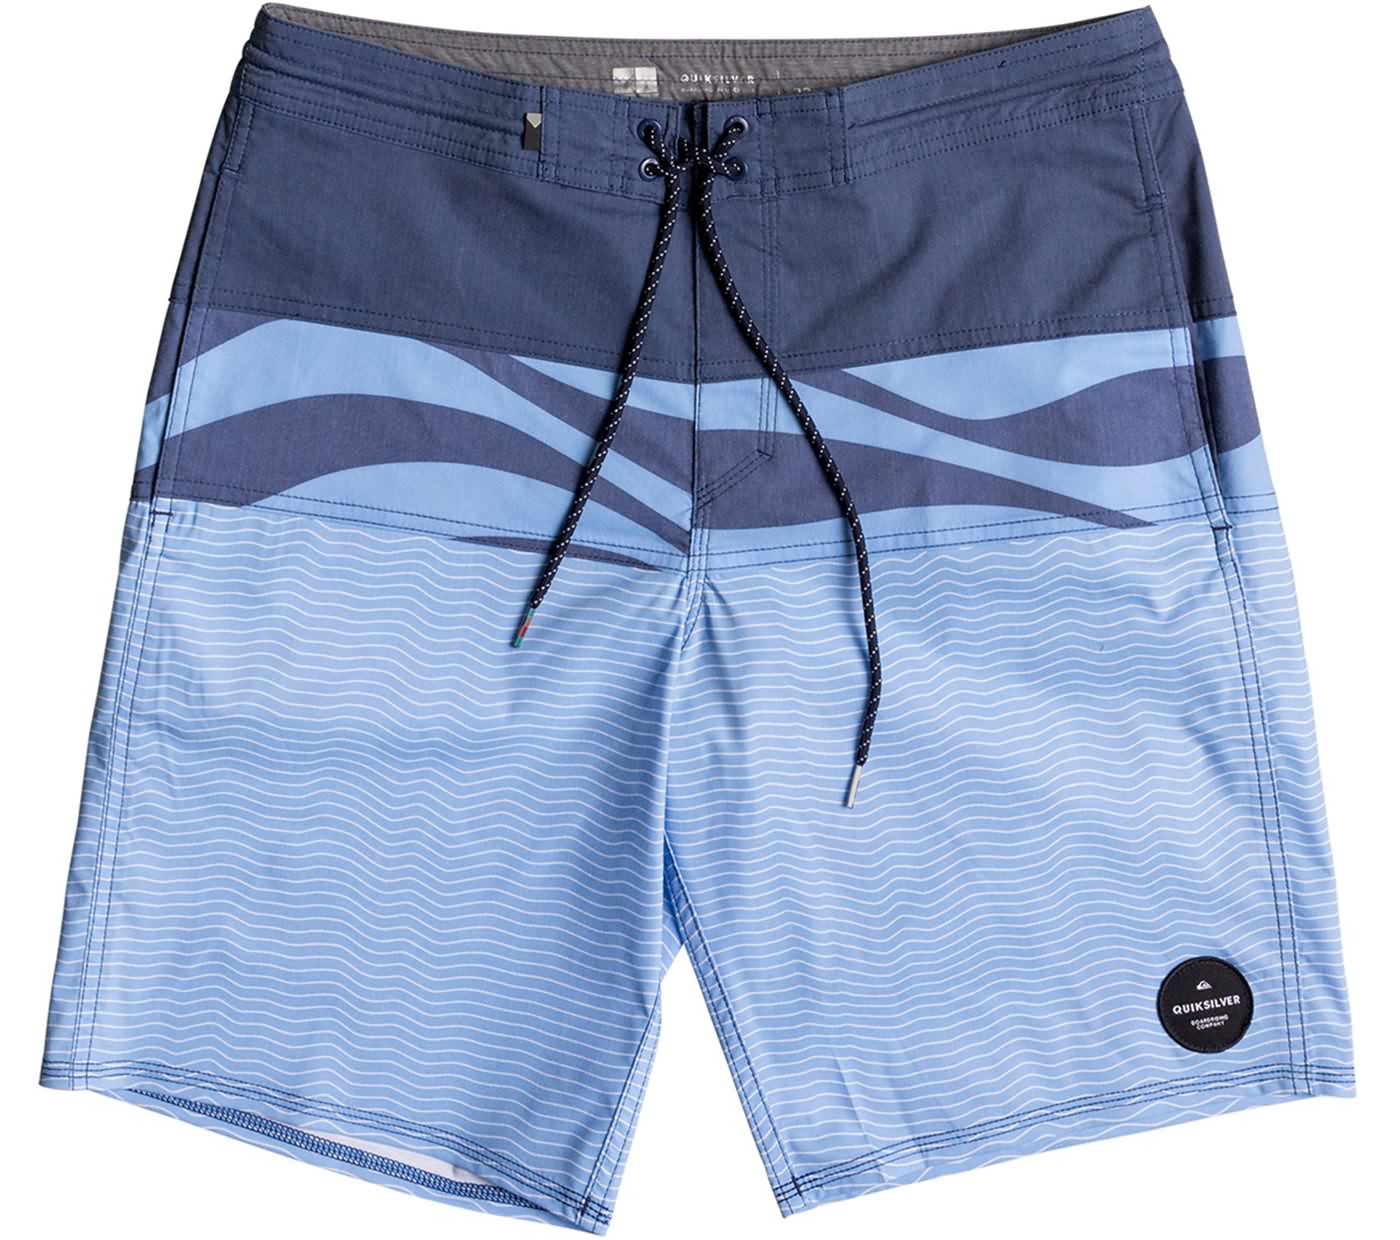 Quiksilver Surf Fall 2017 Mens Boardshorts for Living Collection